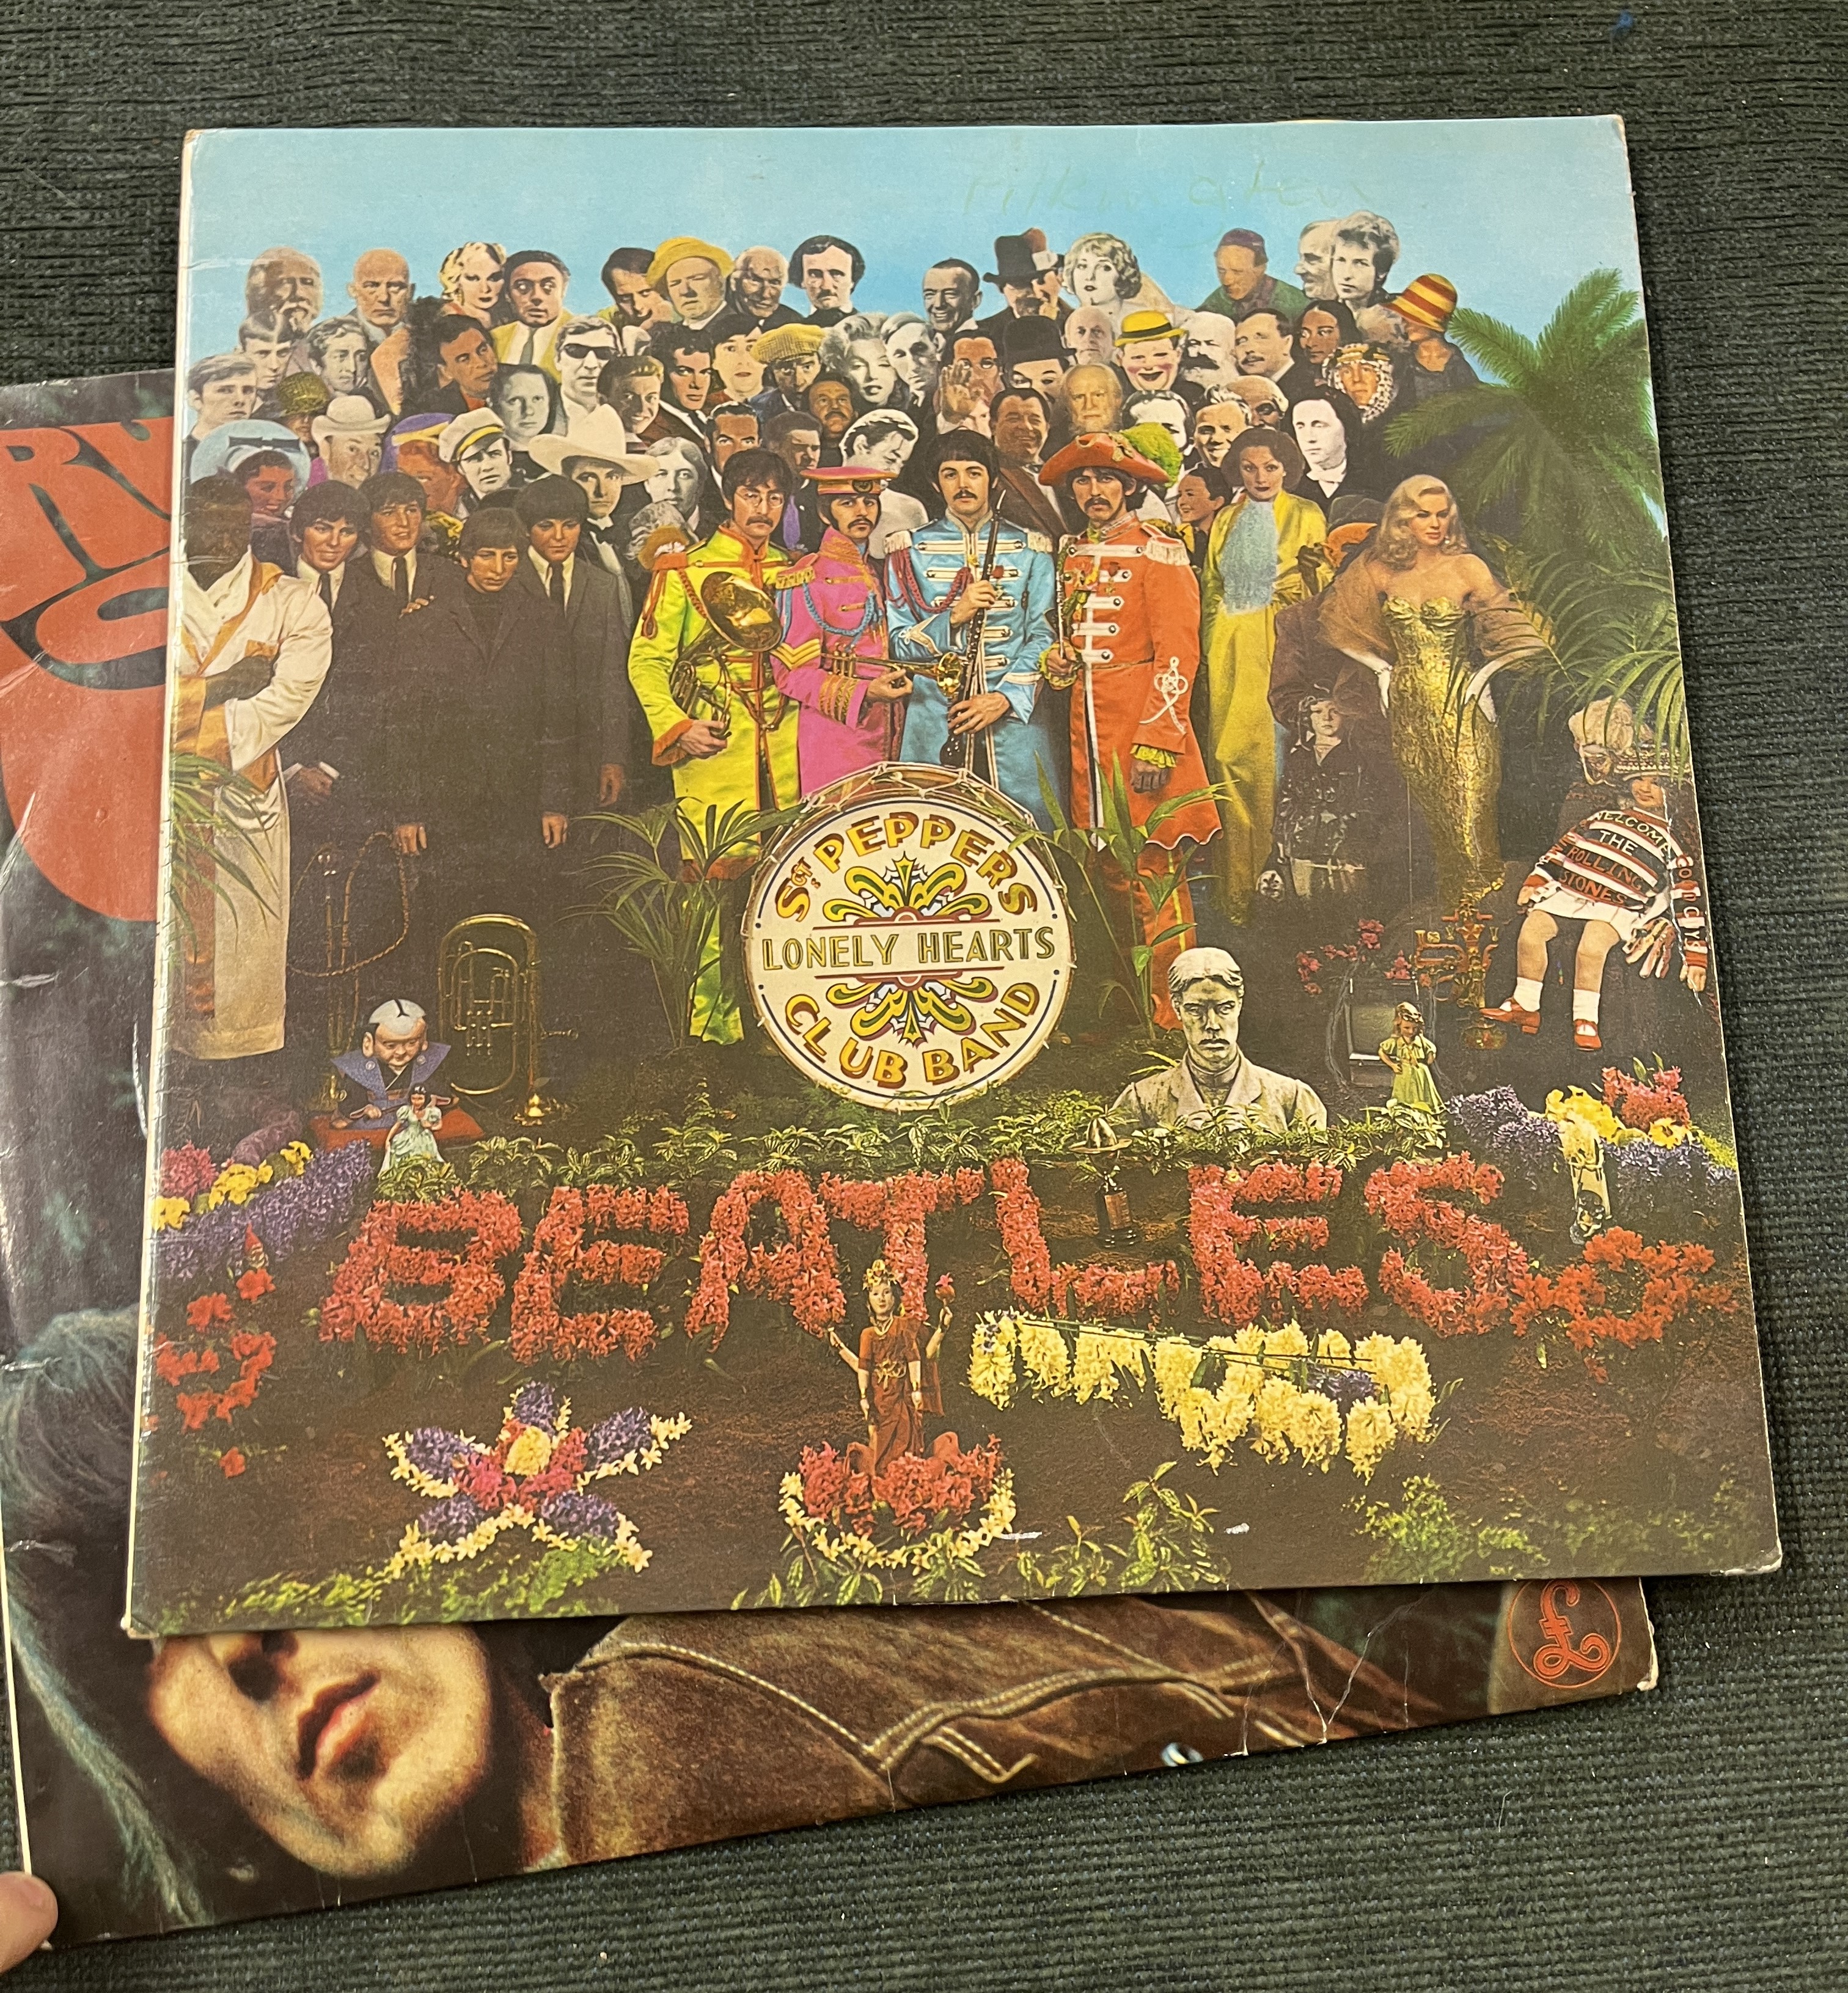 Beatle Lps - First pressing - Image 8 of 9